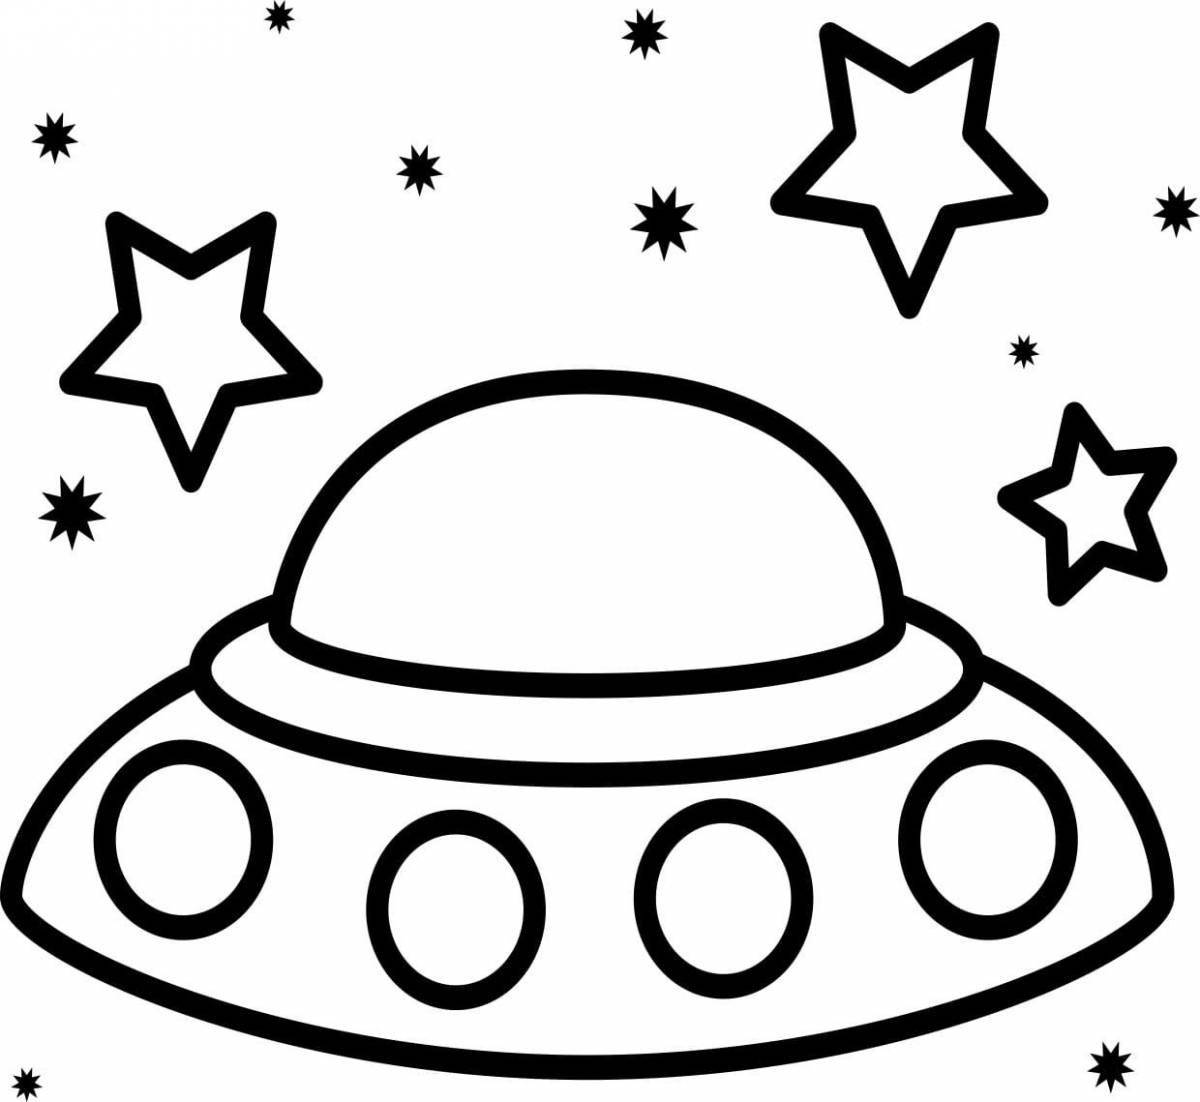 Coloring book shining flying saucer